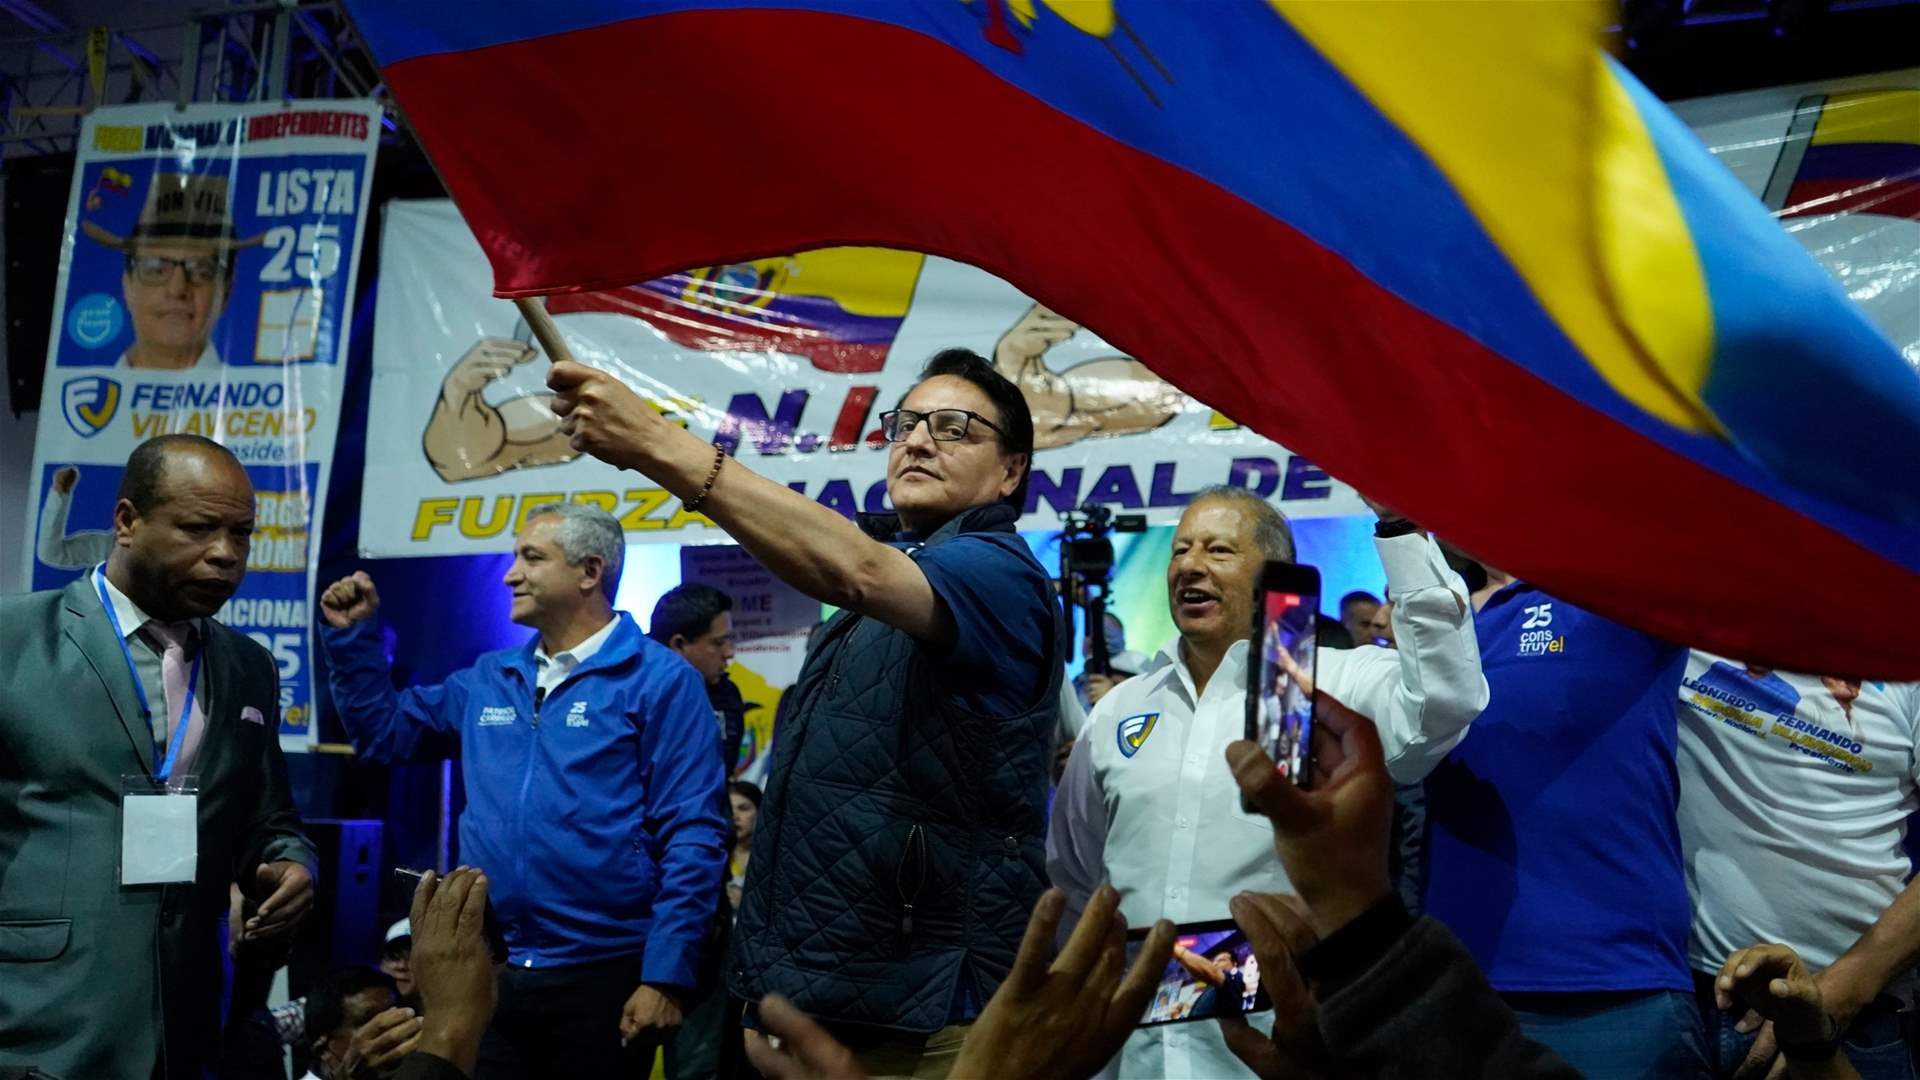 Presidential candidate in Ecuador shot dead after participating in election festival